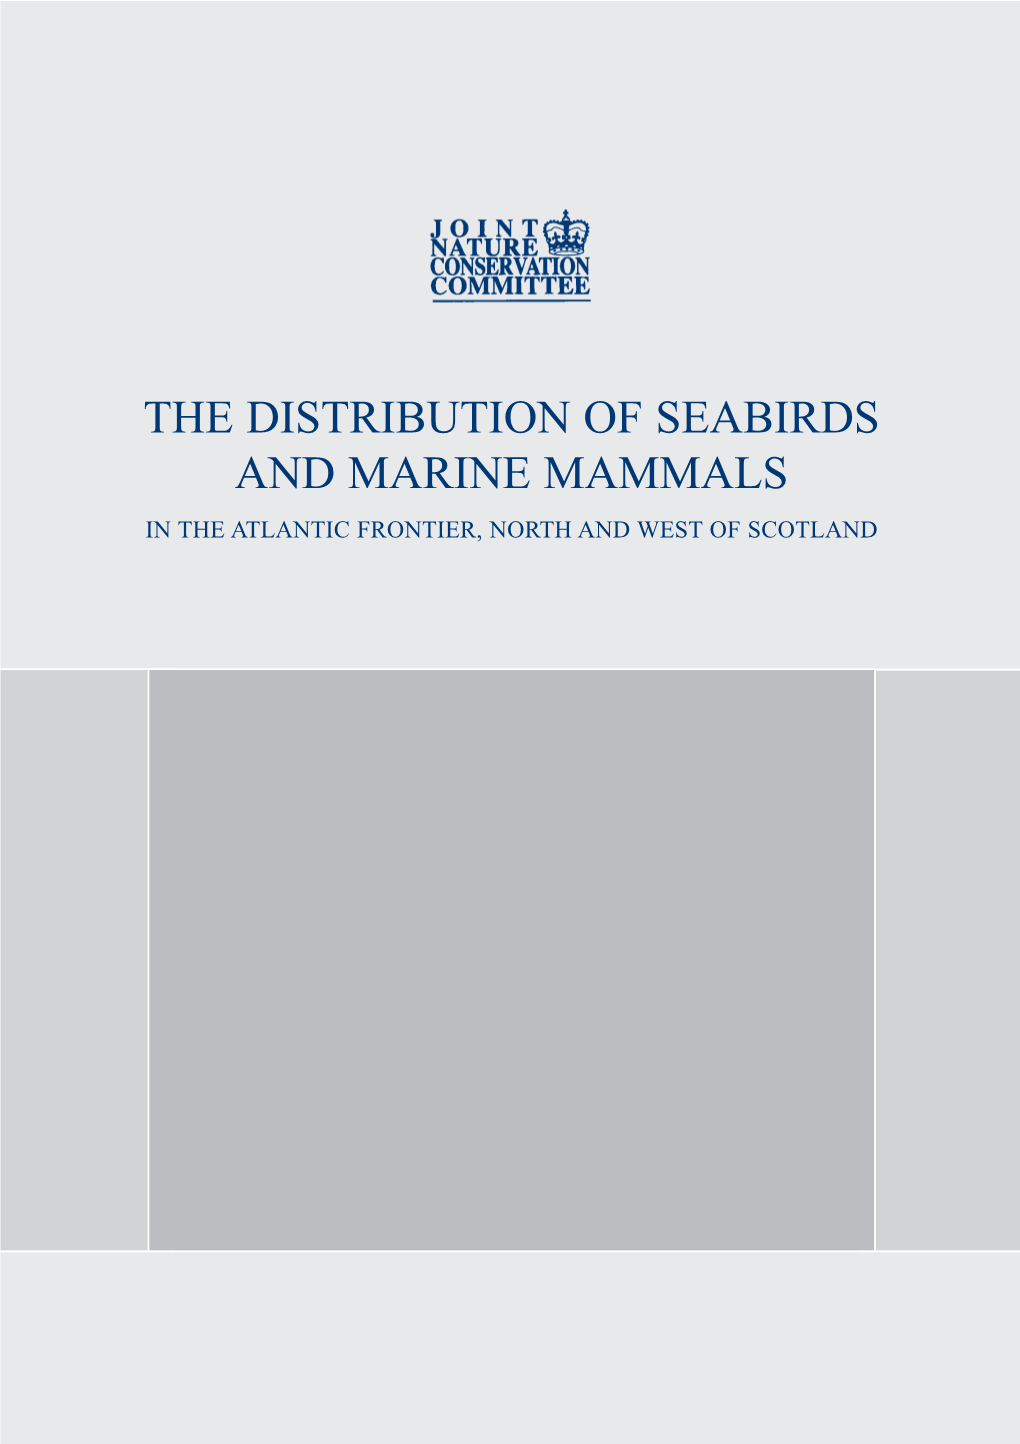 The Distribution of Seabirds and Marine Mammals in the Atlantic